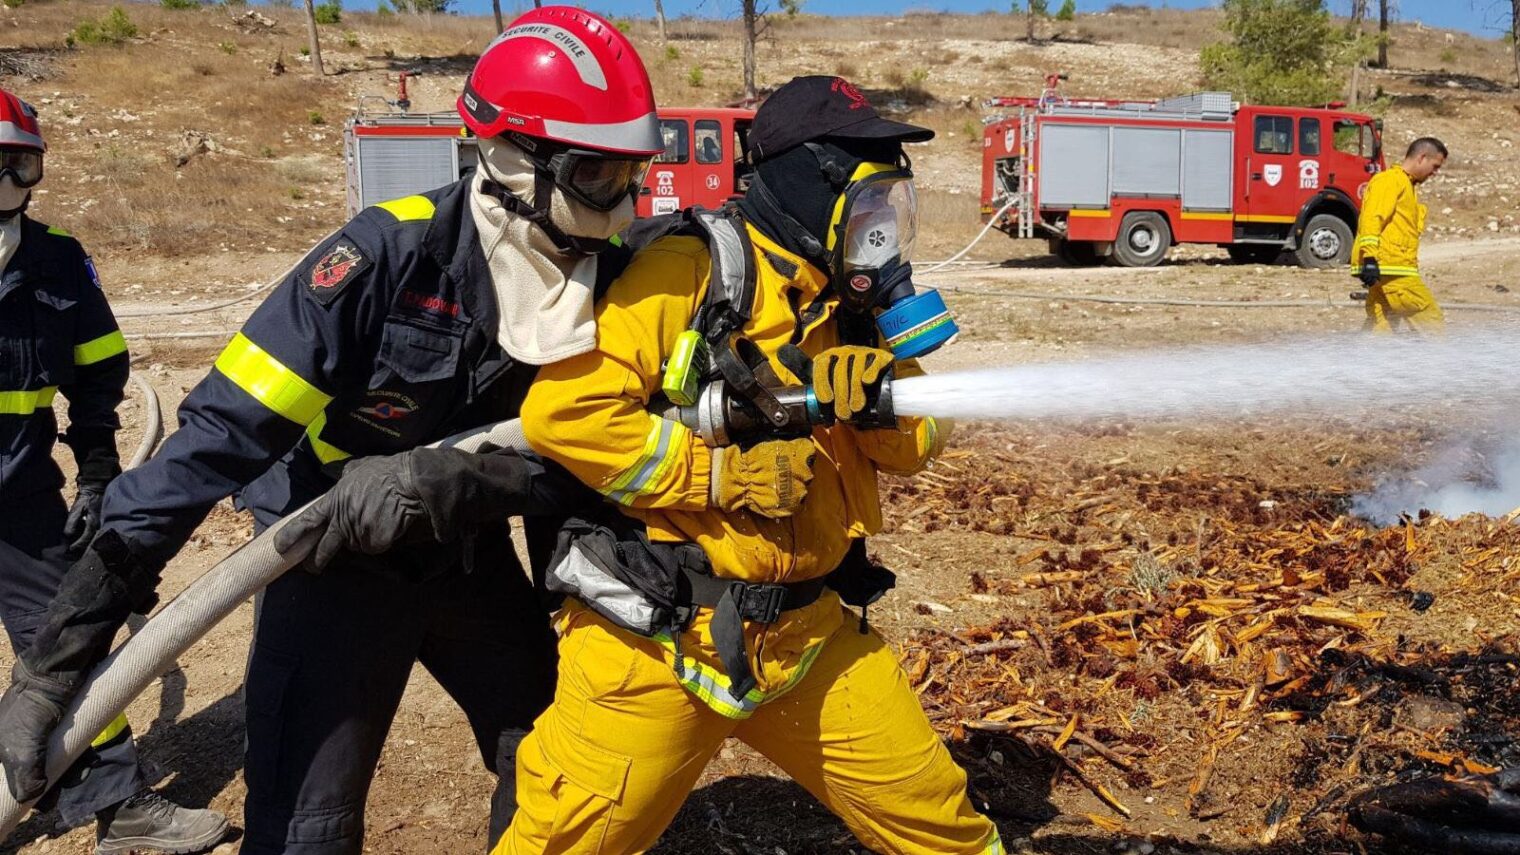 Firefighters participating in a joint Middle East Forest Fires drill in Israel, October 25, 2017. Photo courtesy of Israel Firefighting and Rescue Authority